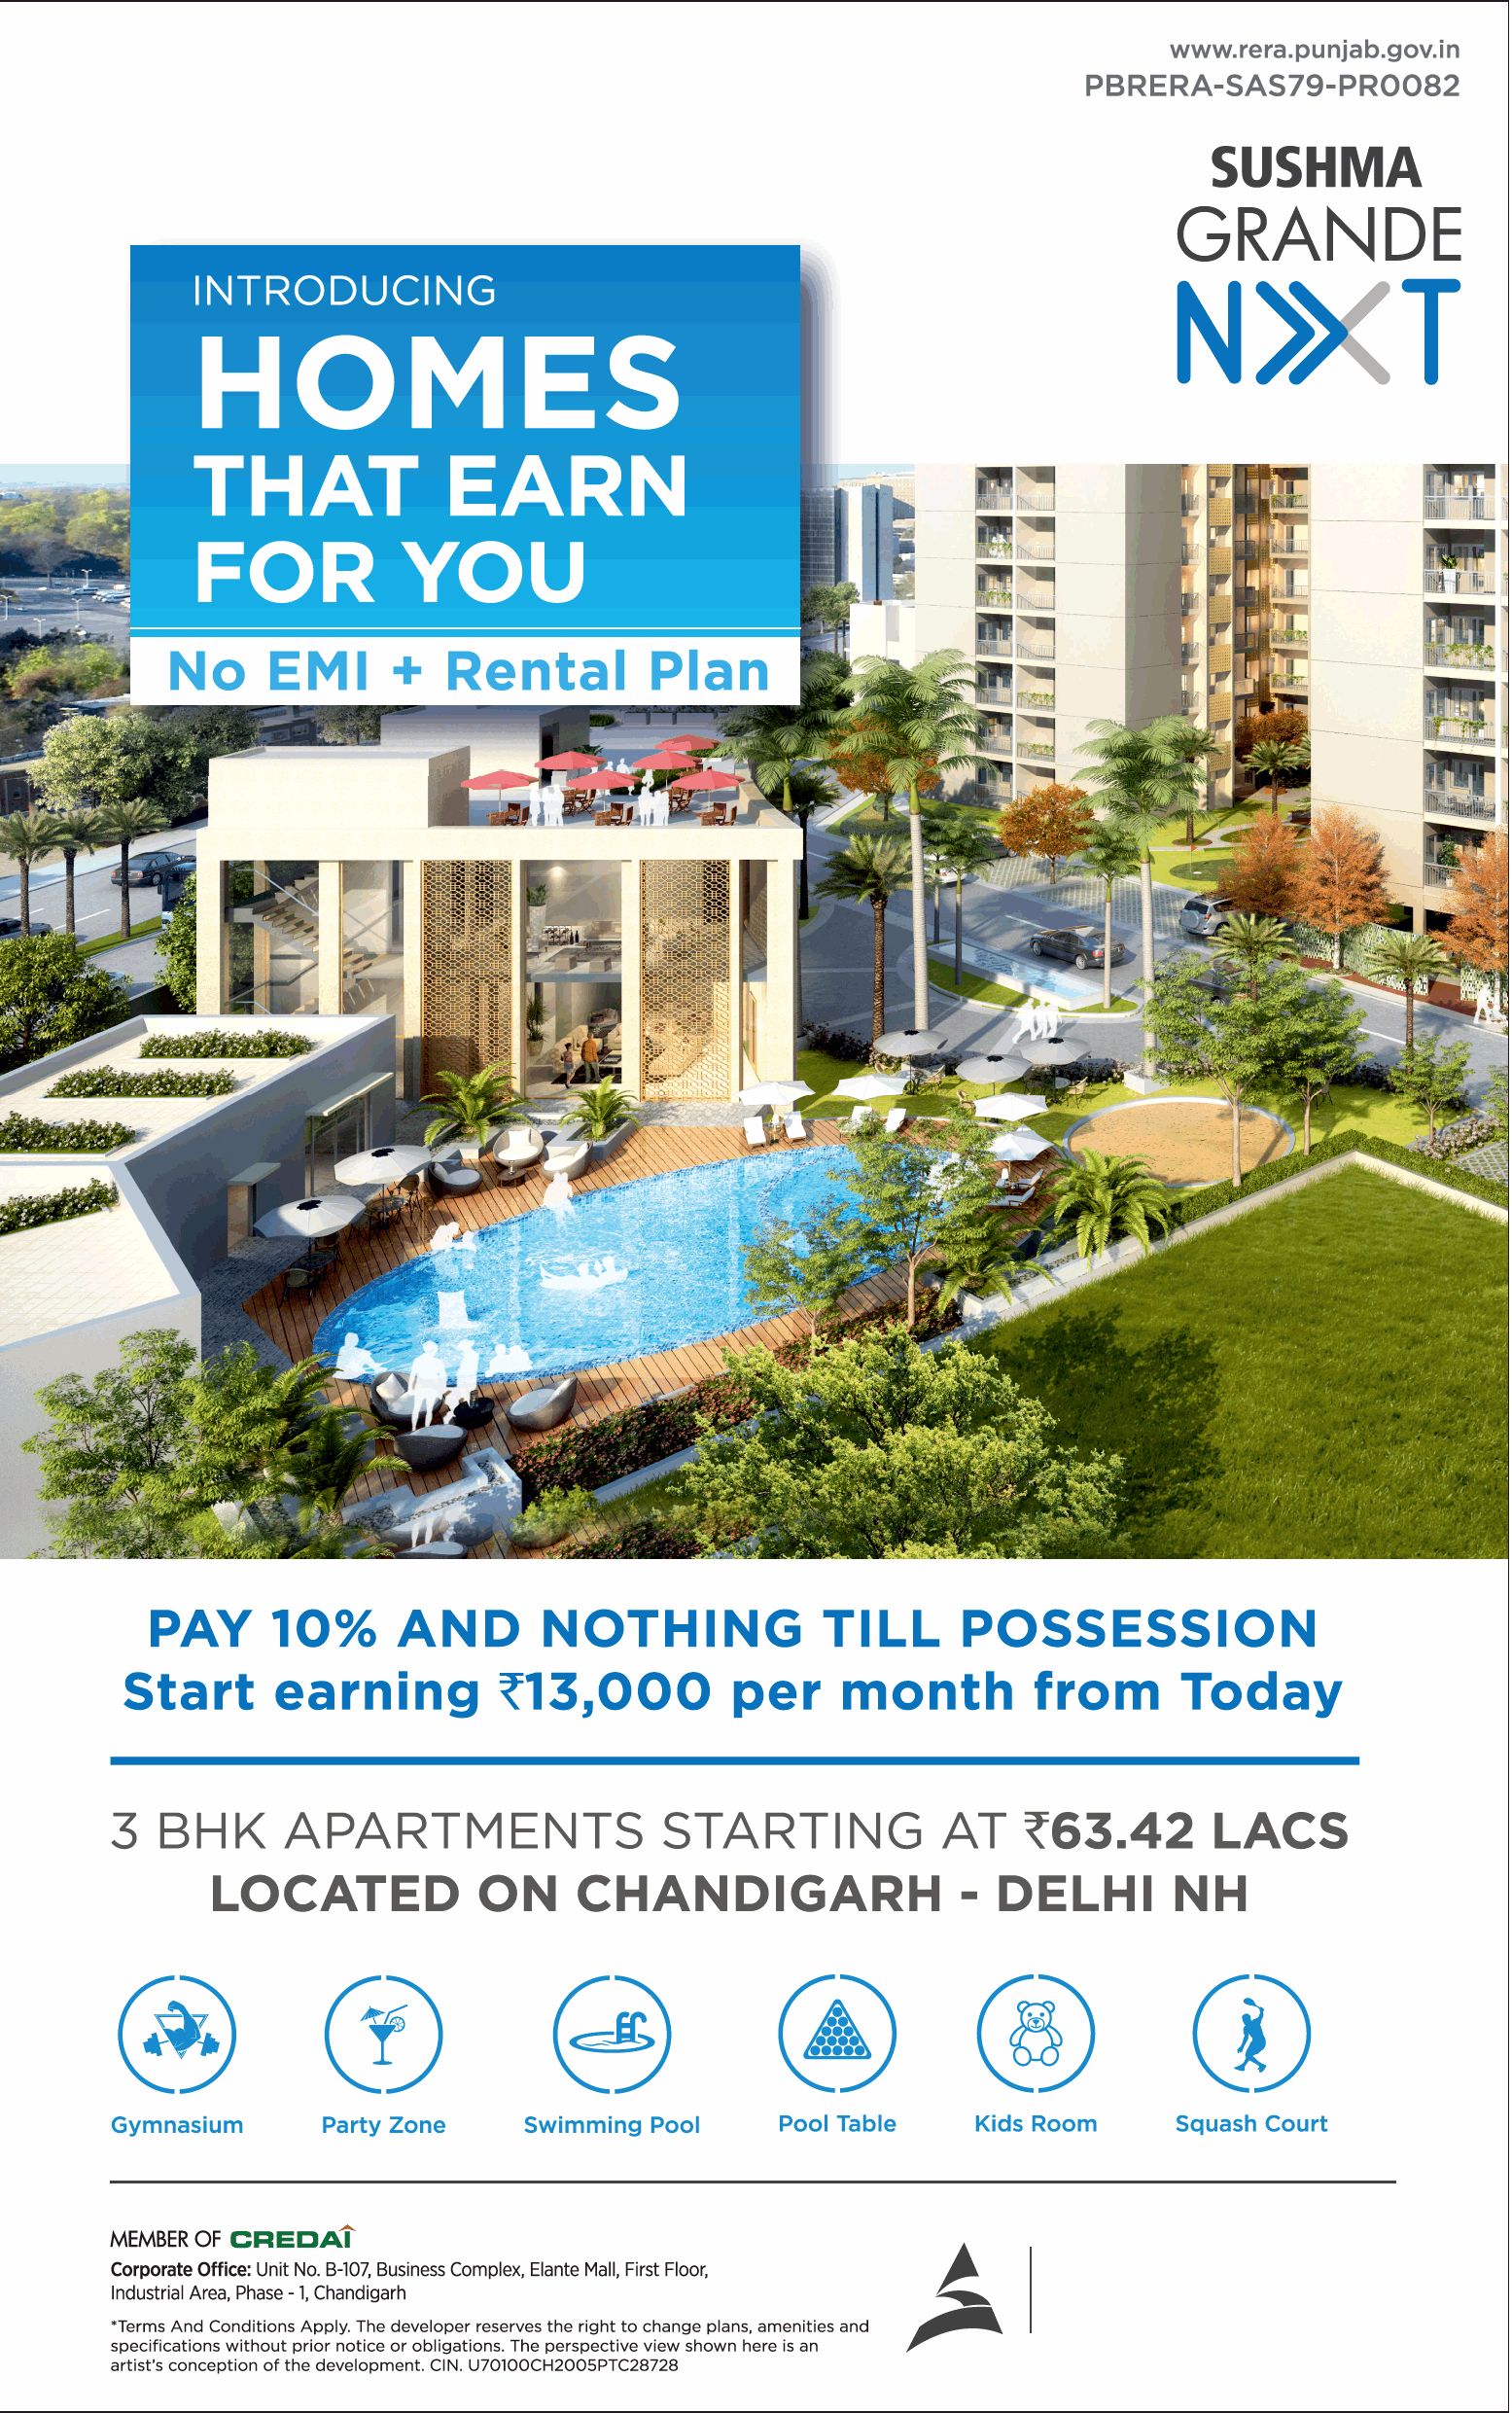 Book 3 BHK apartments starting at Rs 63.42 Lacs at Sushma Grande Nxt in Chandigarh Update